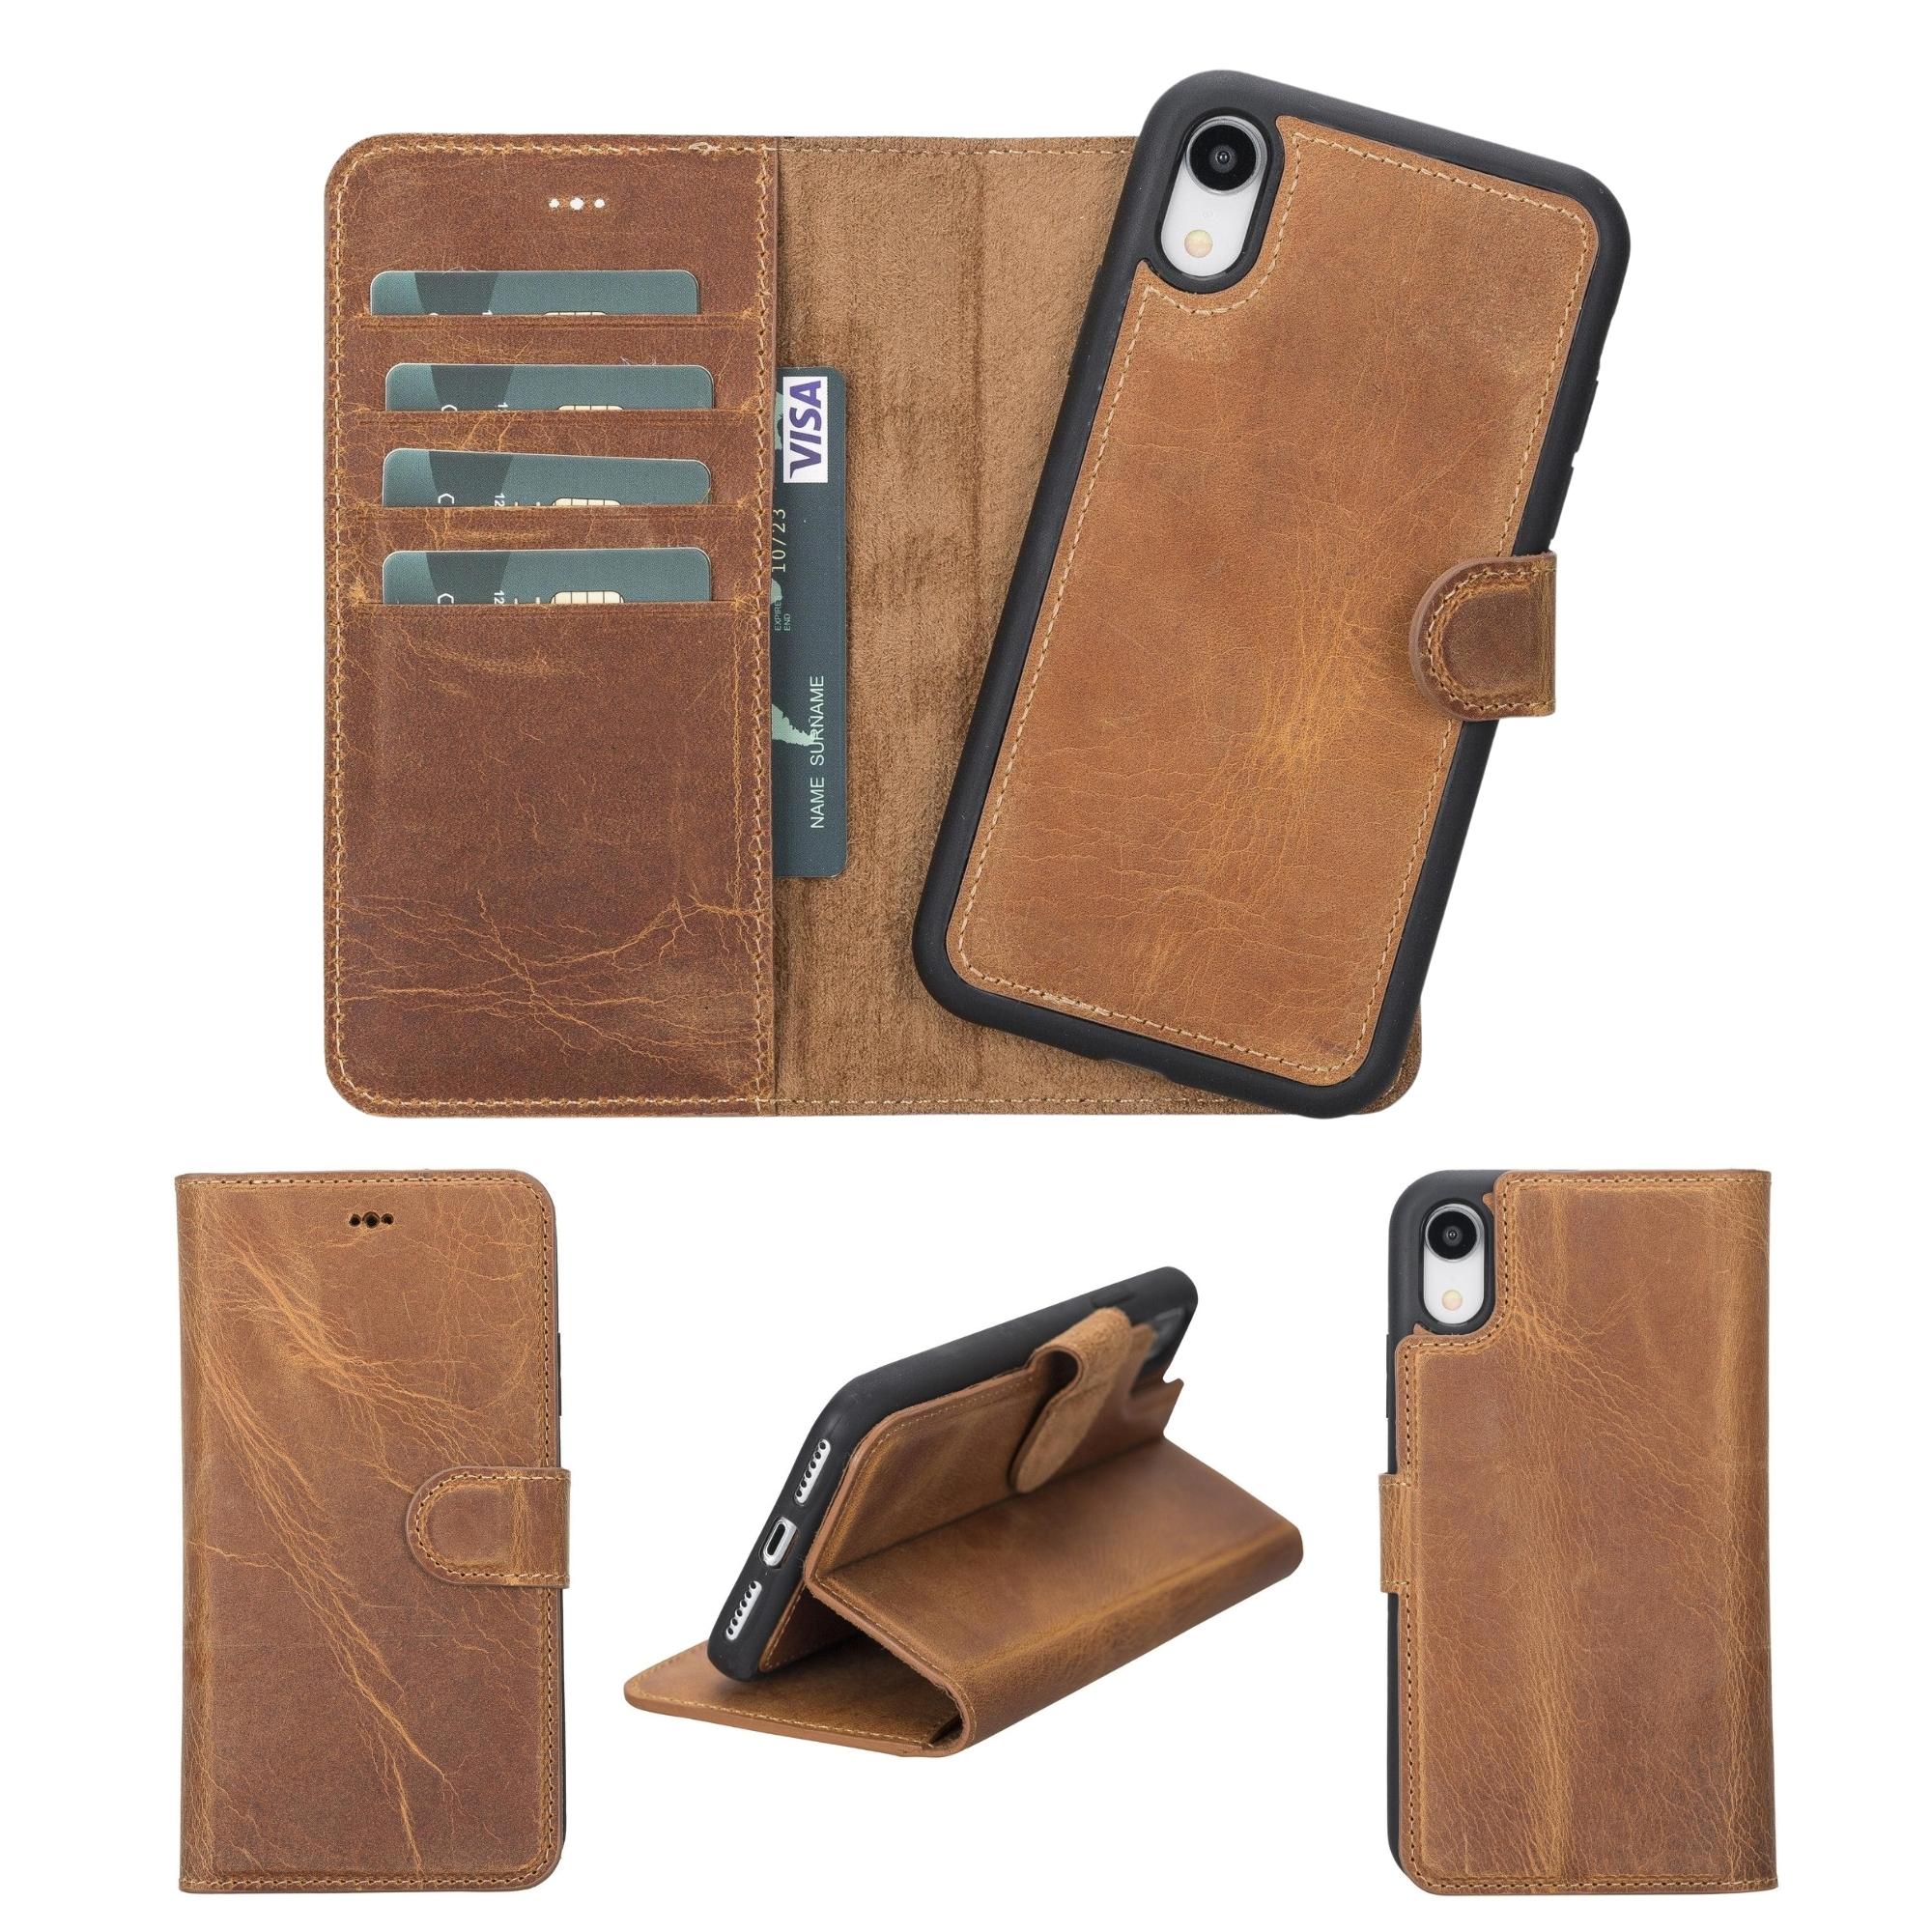 Casper iPhone X and XS Leather Wallet Case